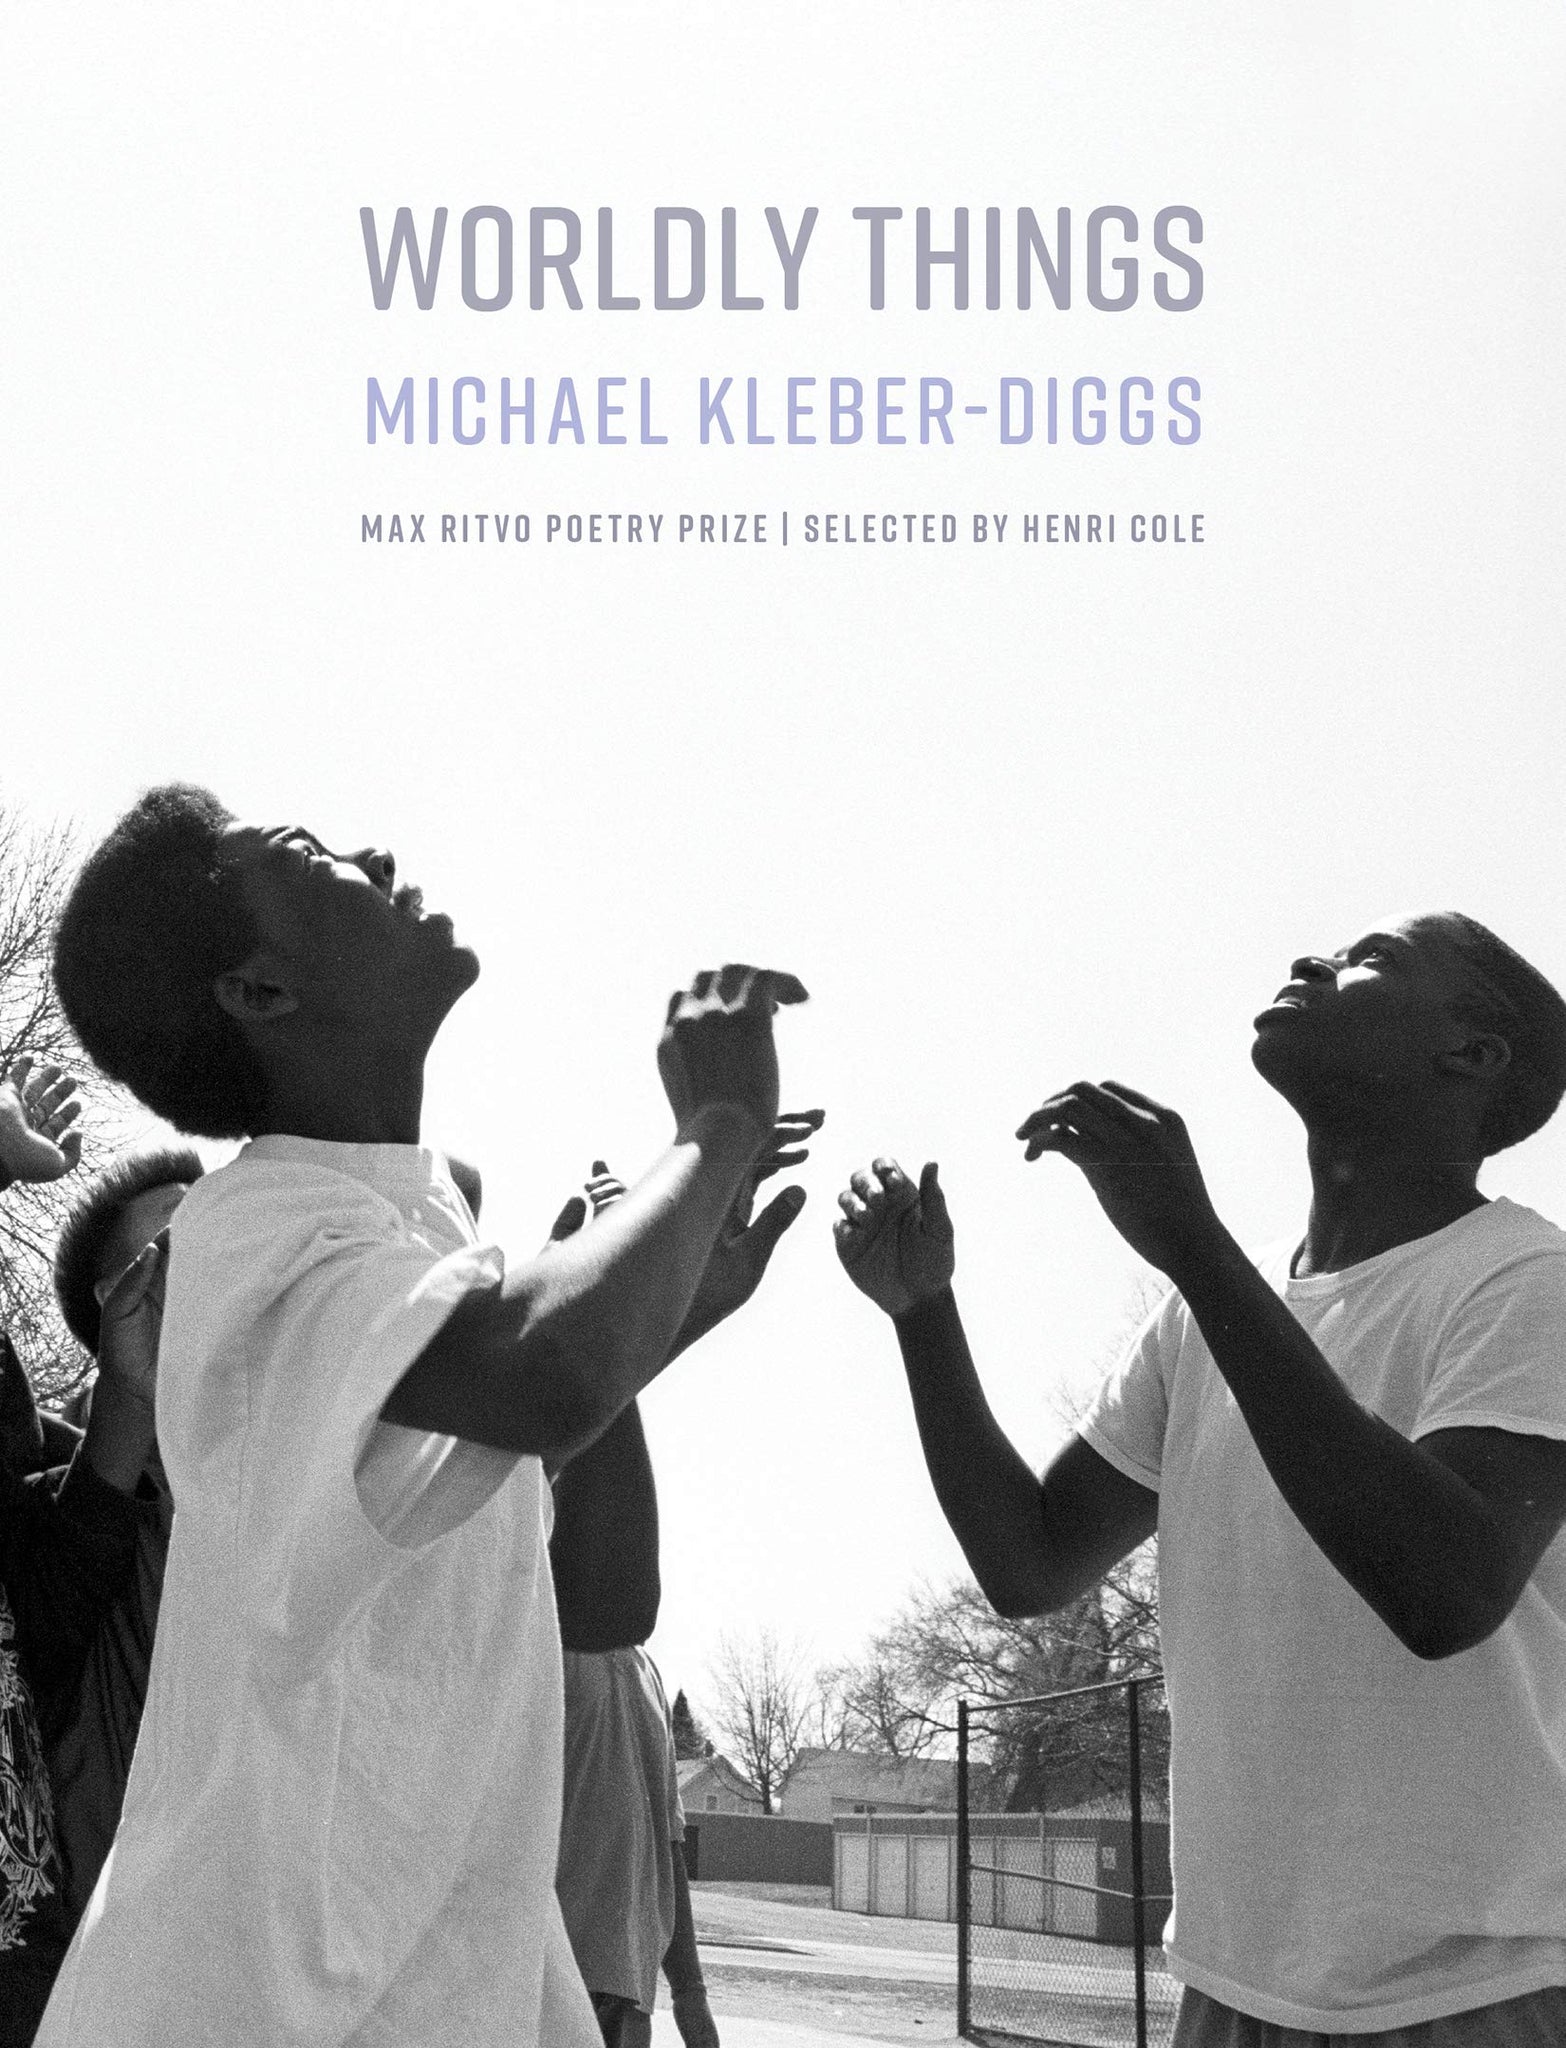 Worldly Things (Hardcover)